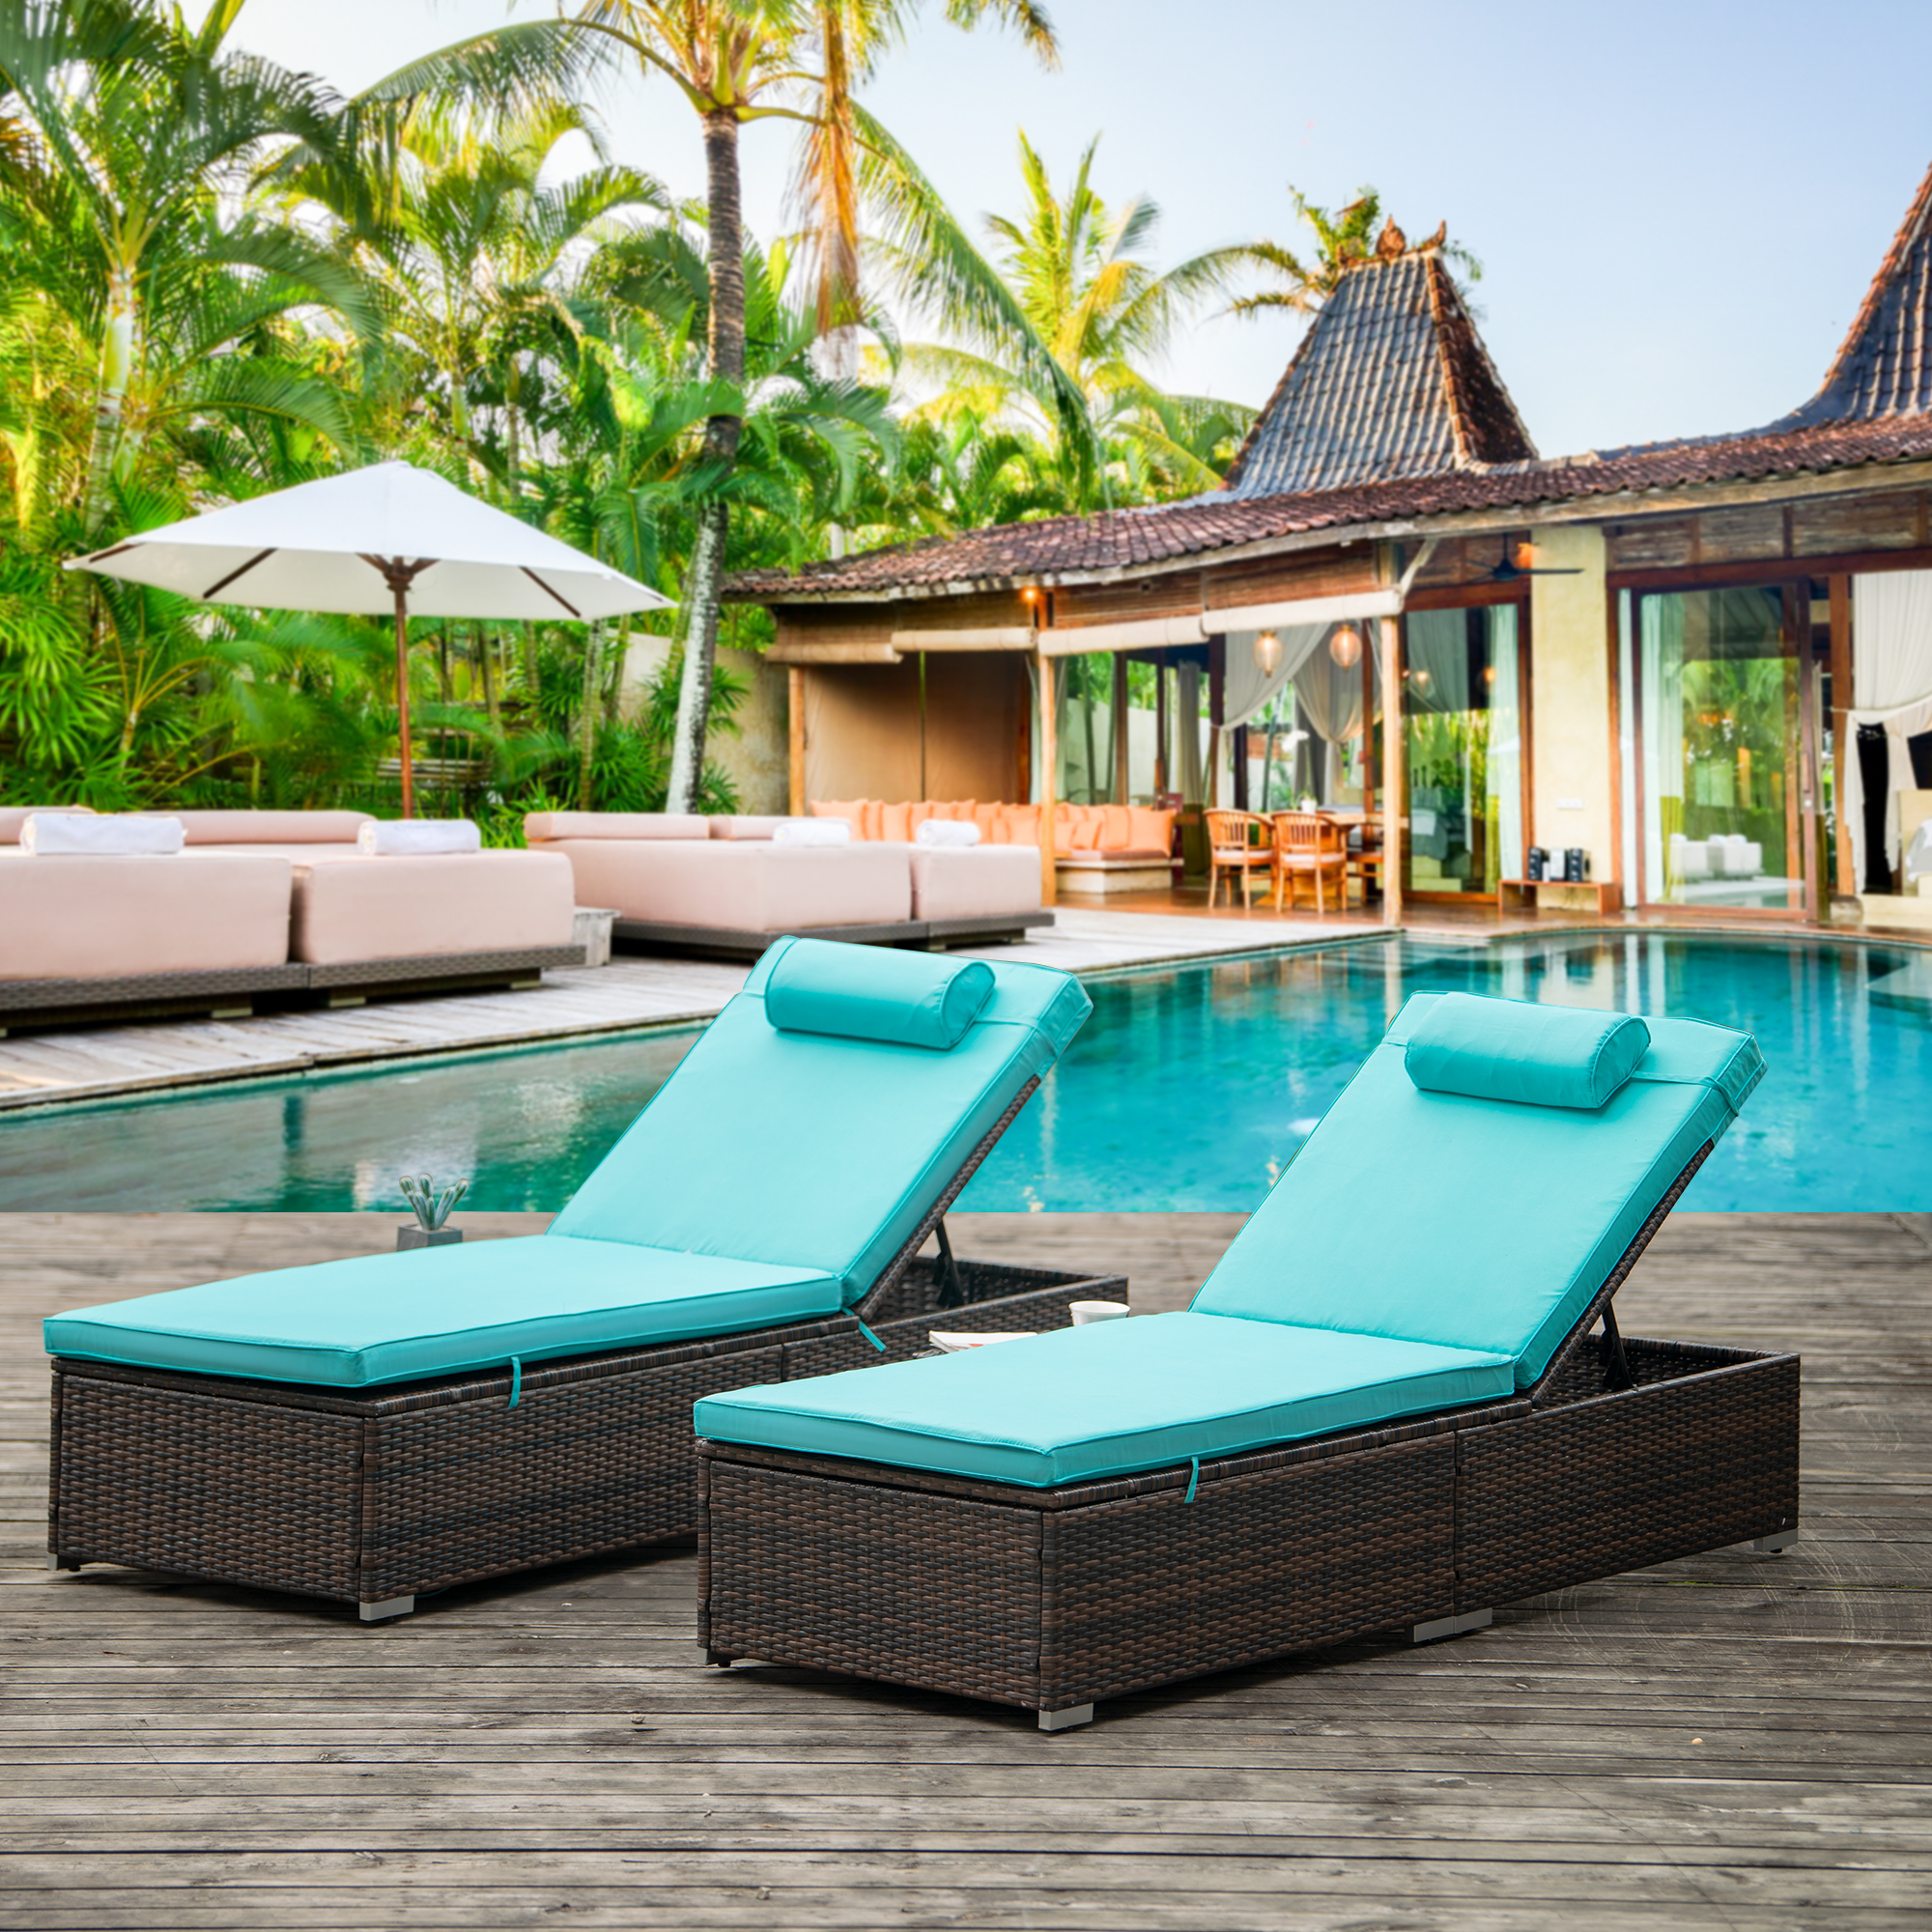 2 Pieces Outdoor Patio PE Wicker Chaise Lounge Set, Adjustable Reclining Lounge Chairs with Side Table and Head Pillow, Outdoor Chaise Lounger with Cushions for Patio Pool Backyard Porch Garden, B67 - image 1 of 11